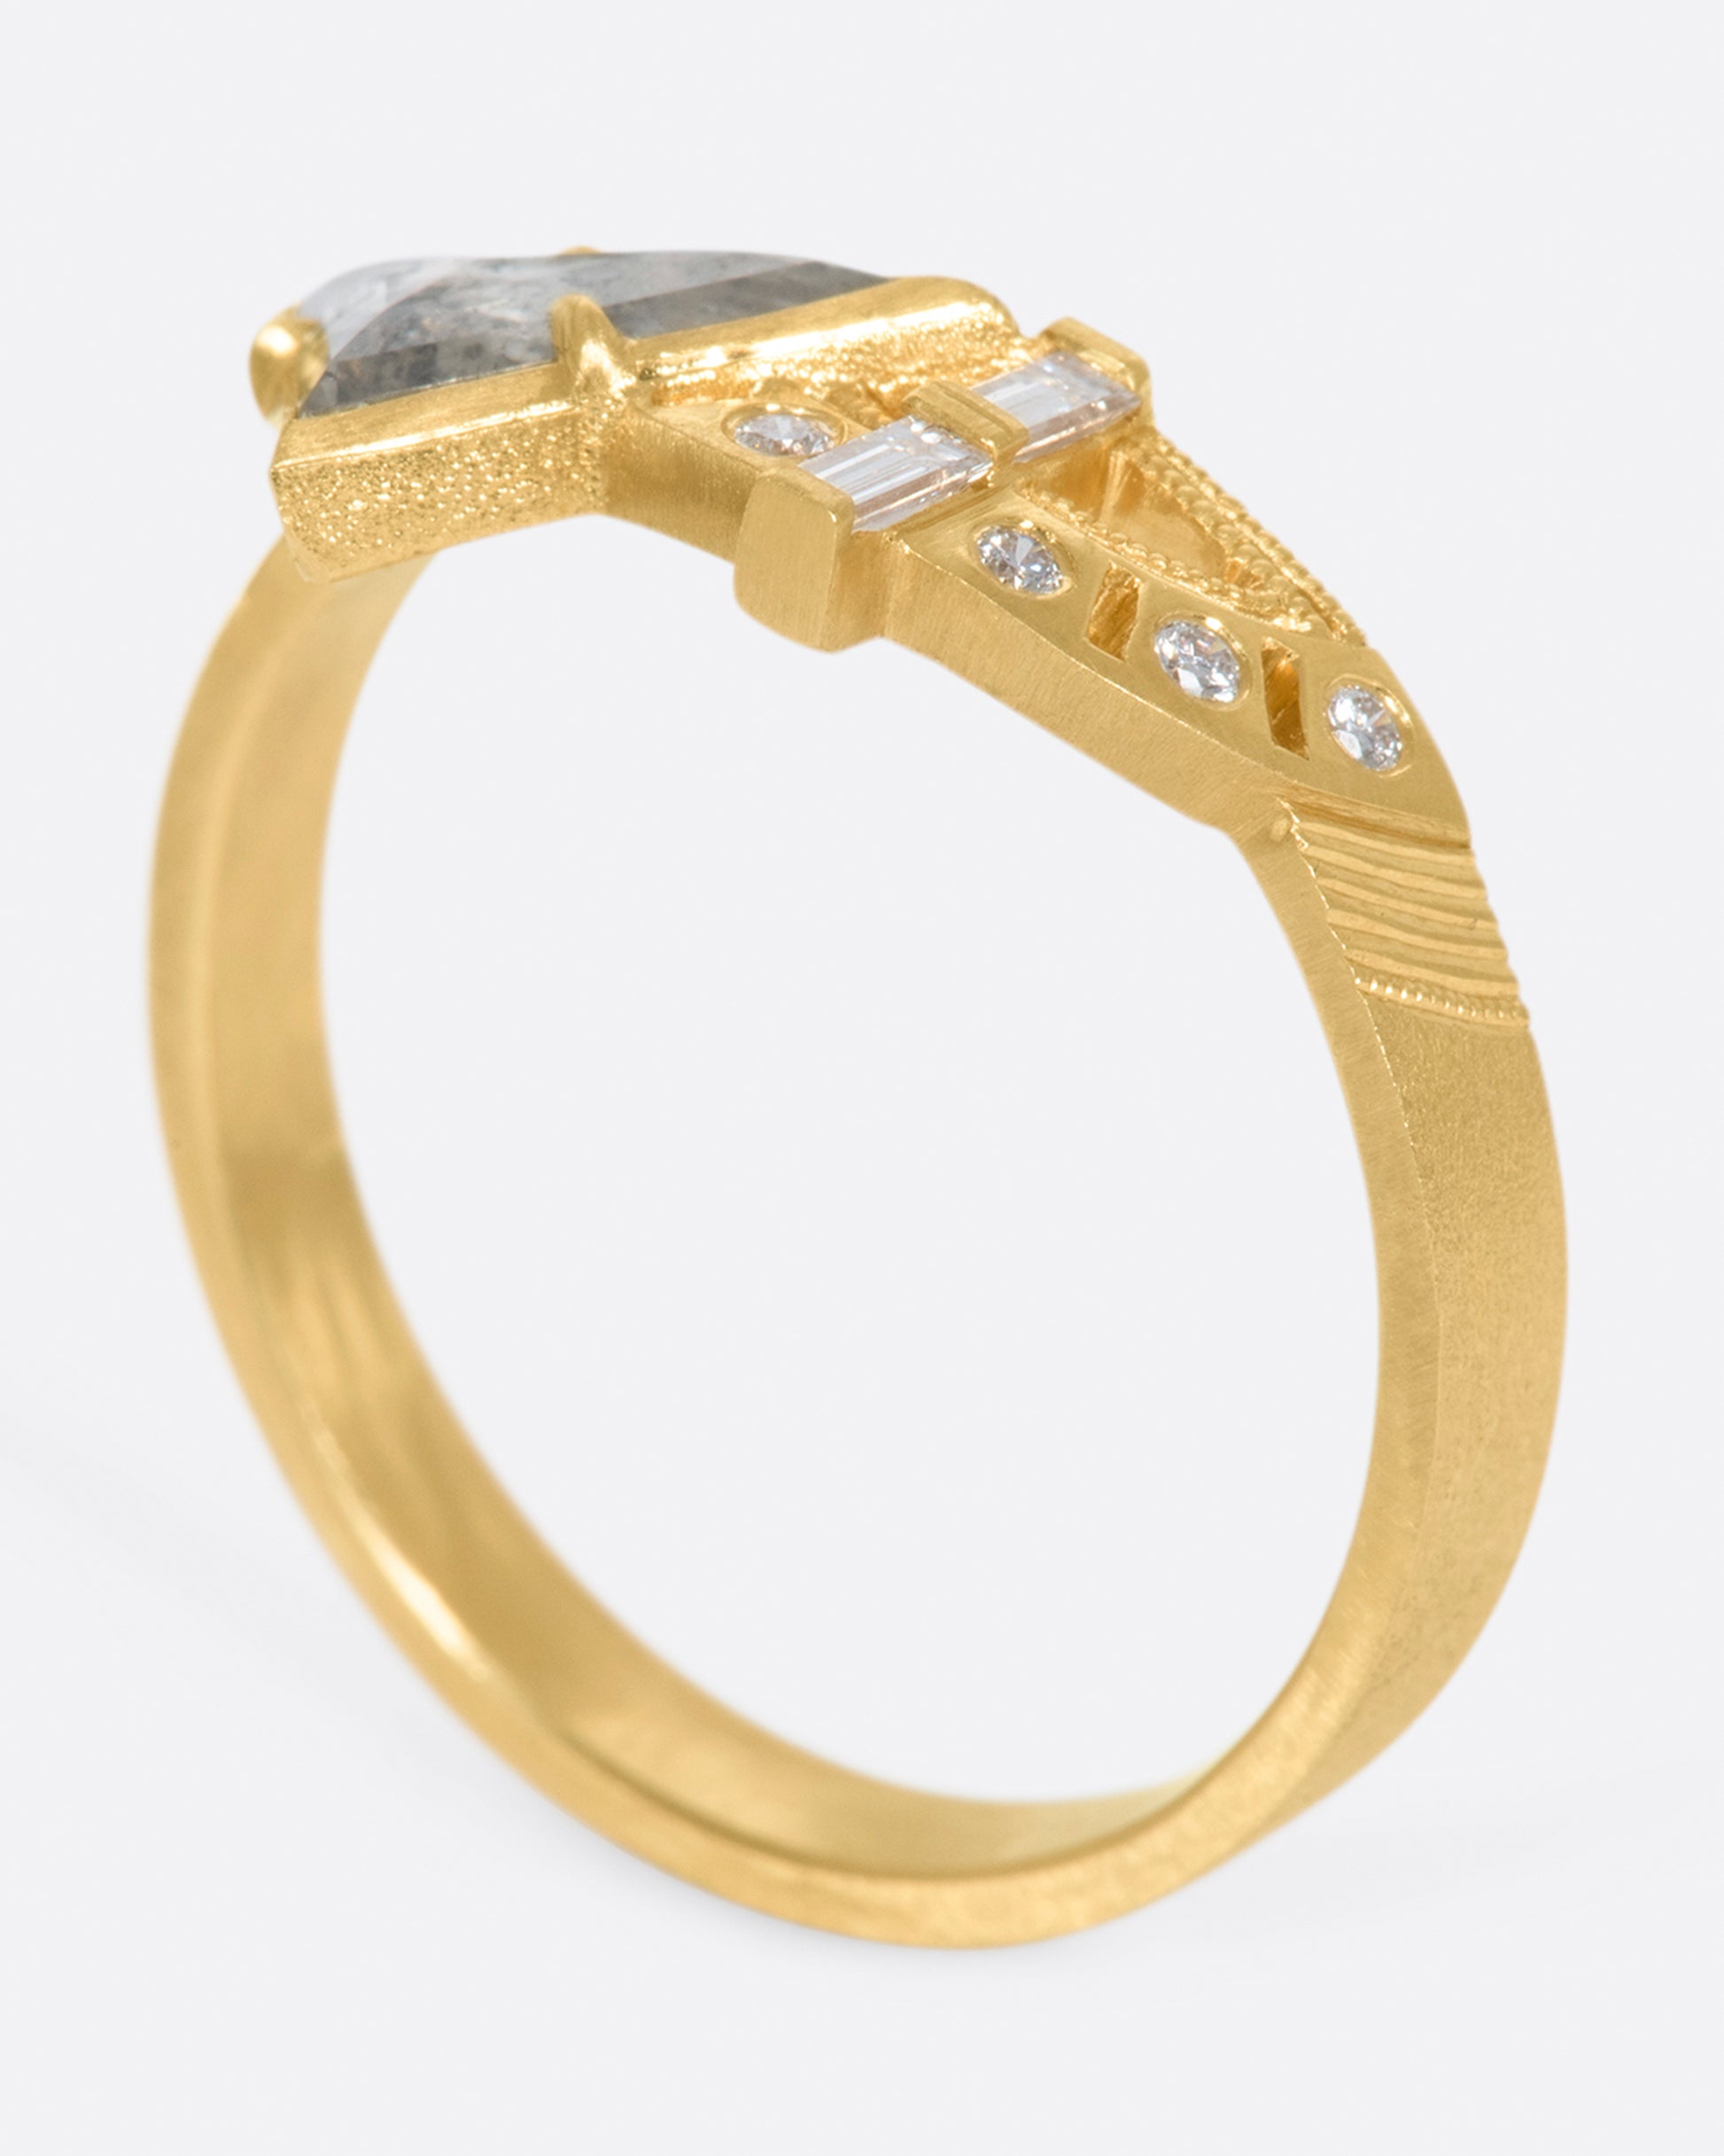 A wide flat band with a salt & pepper trillion cut diamond, gold arches, and round diamonds at its center.